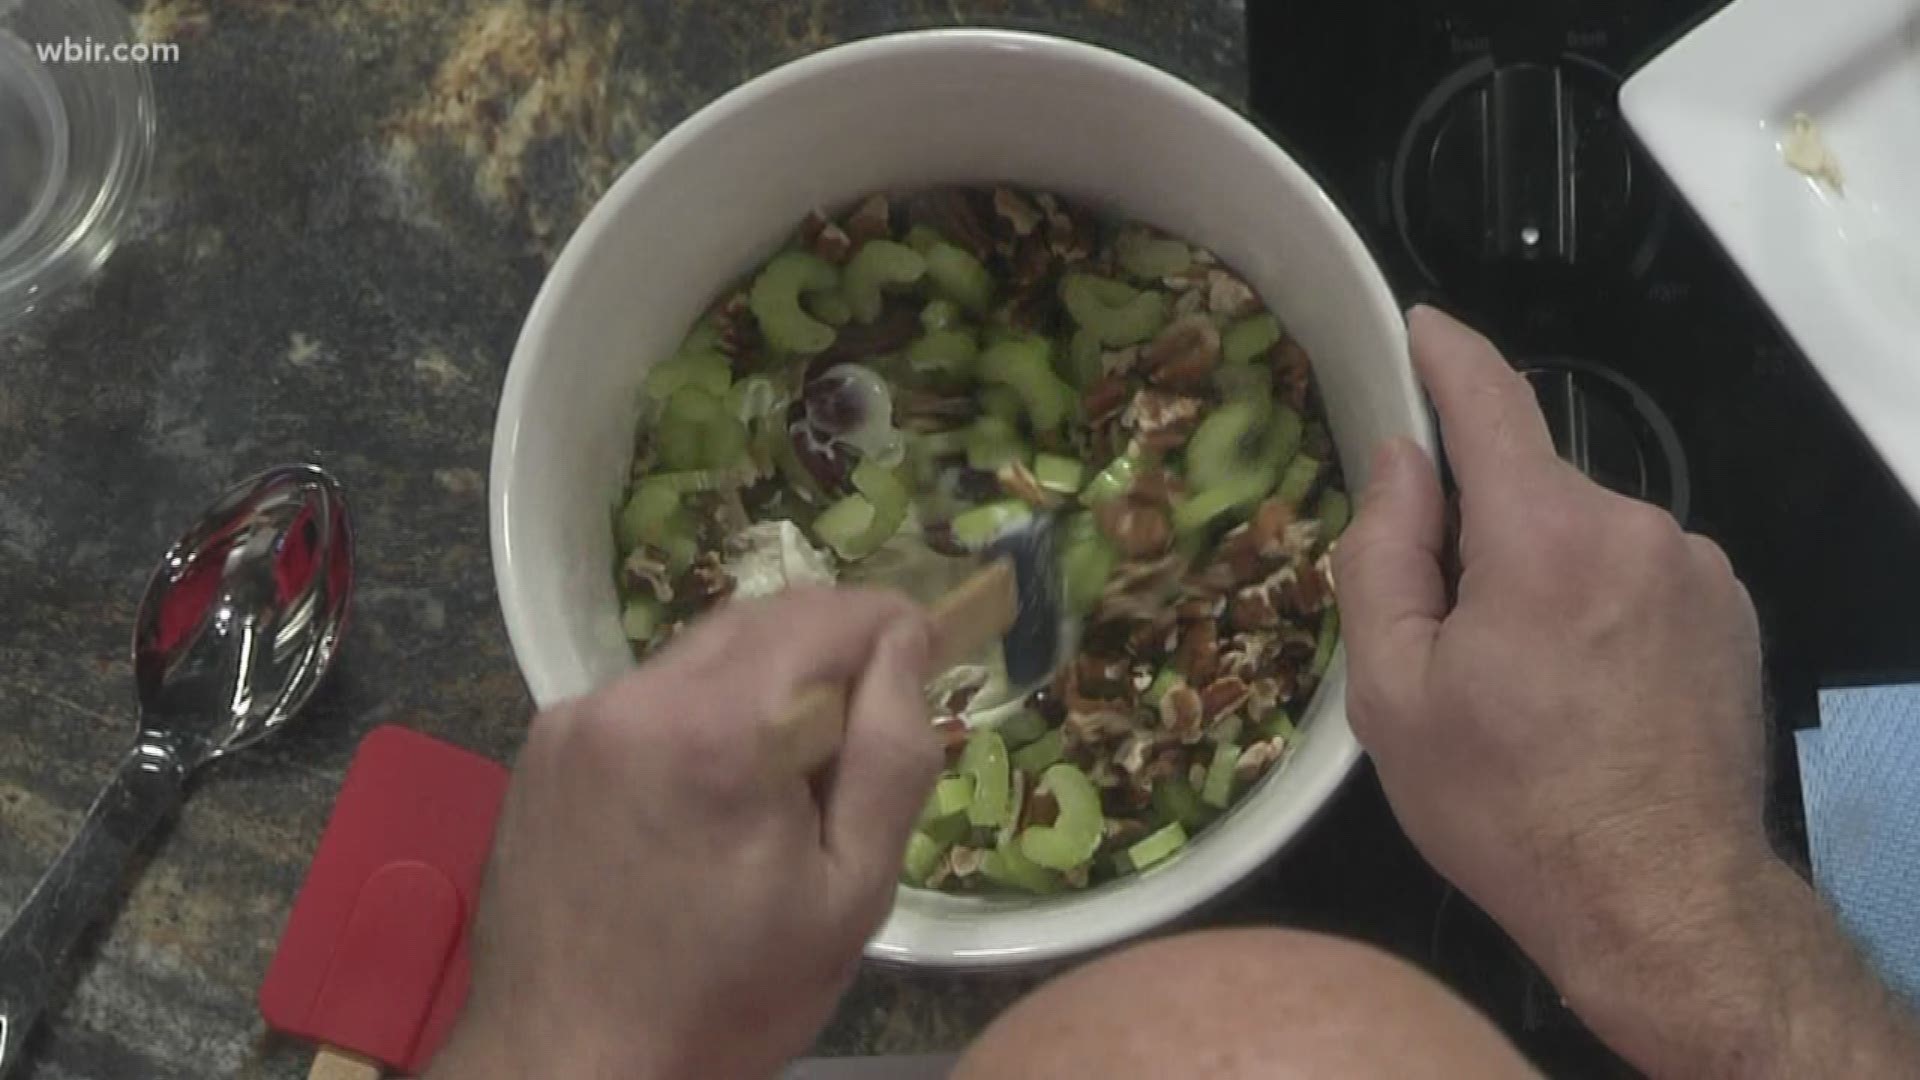 Chicken tenders, celery, grapes and pecans give this chicken salad recipe its flavor.